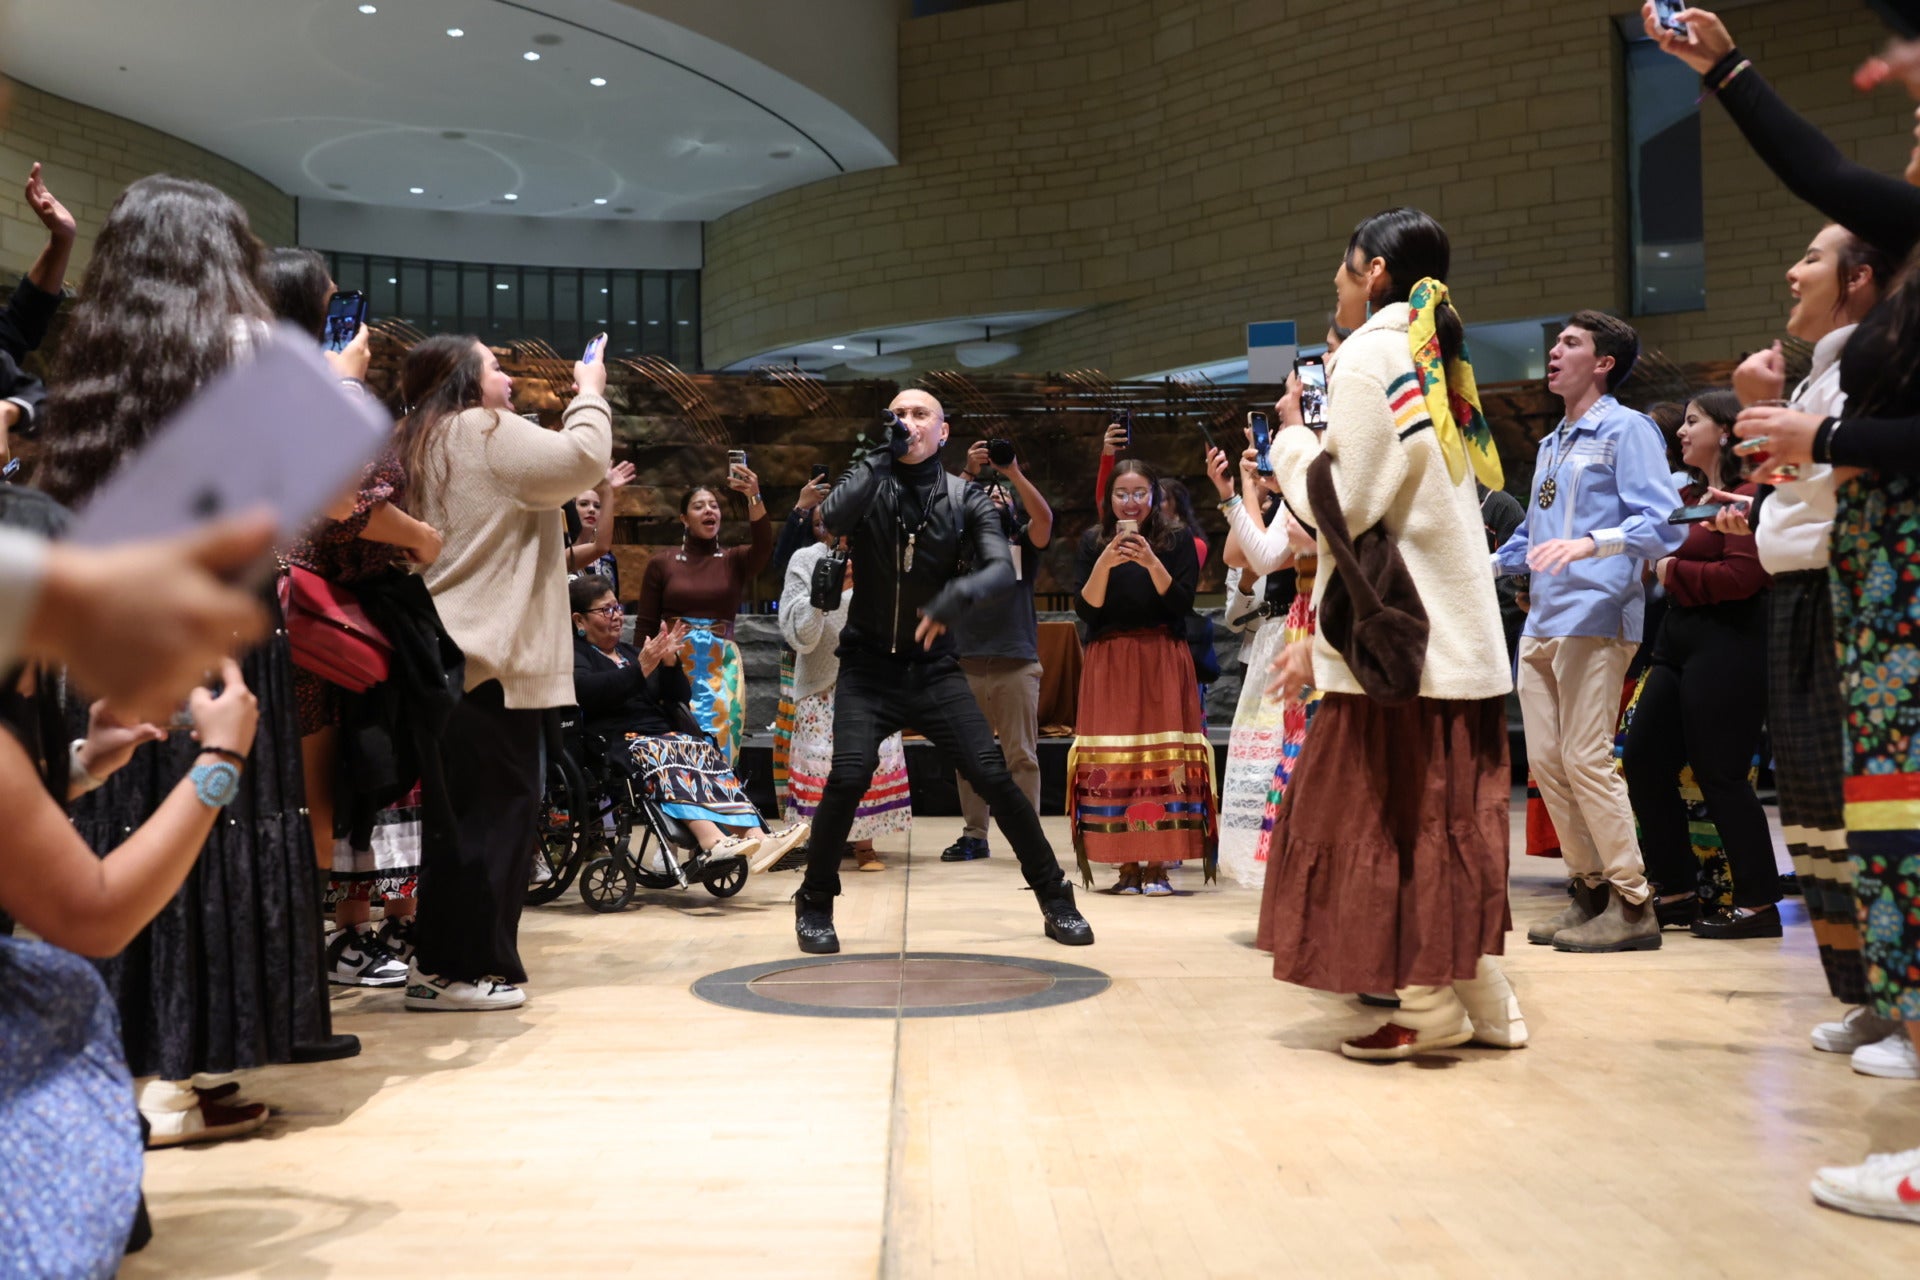 A crowd of Indigenous people wearing traditional attire gather around a singer who is jumping up in the air and holding a mic. He is wearing all black. The people surrounding him are also jumping, smiling, clapping, and being joyful. They are on a light brown floor.